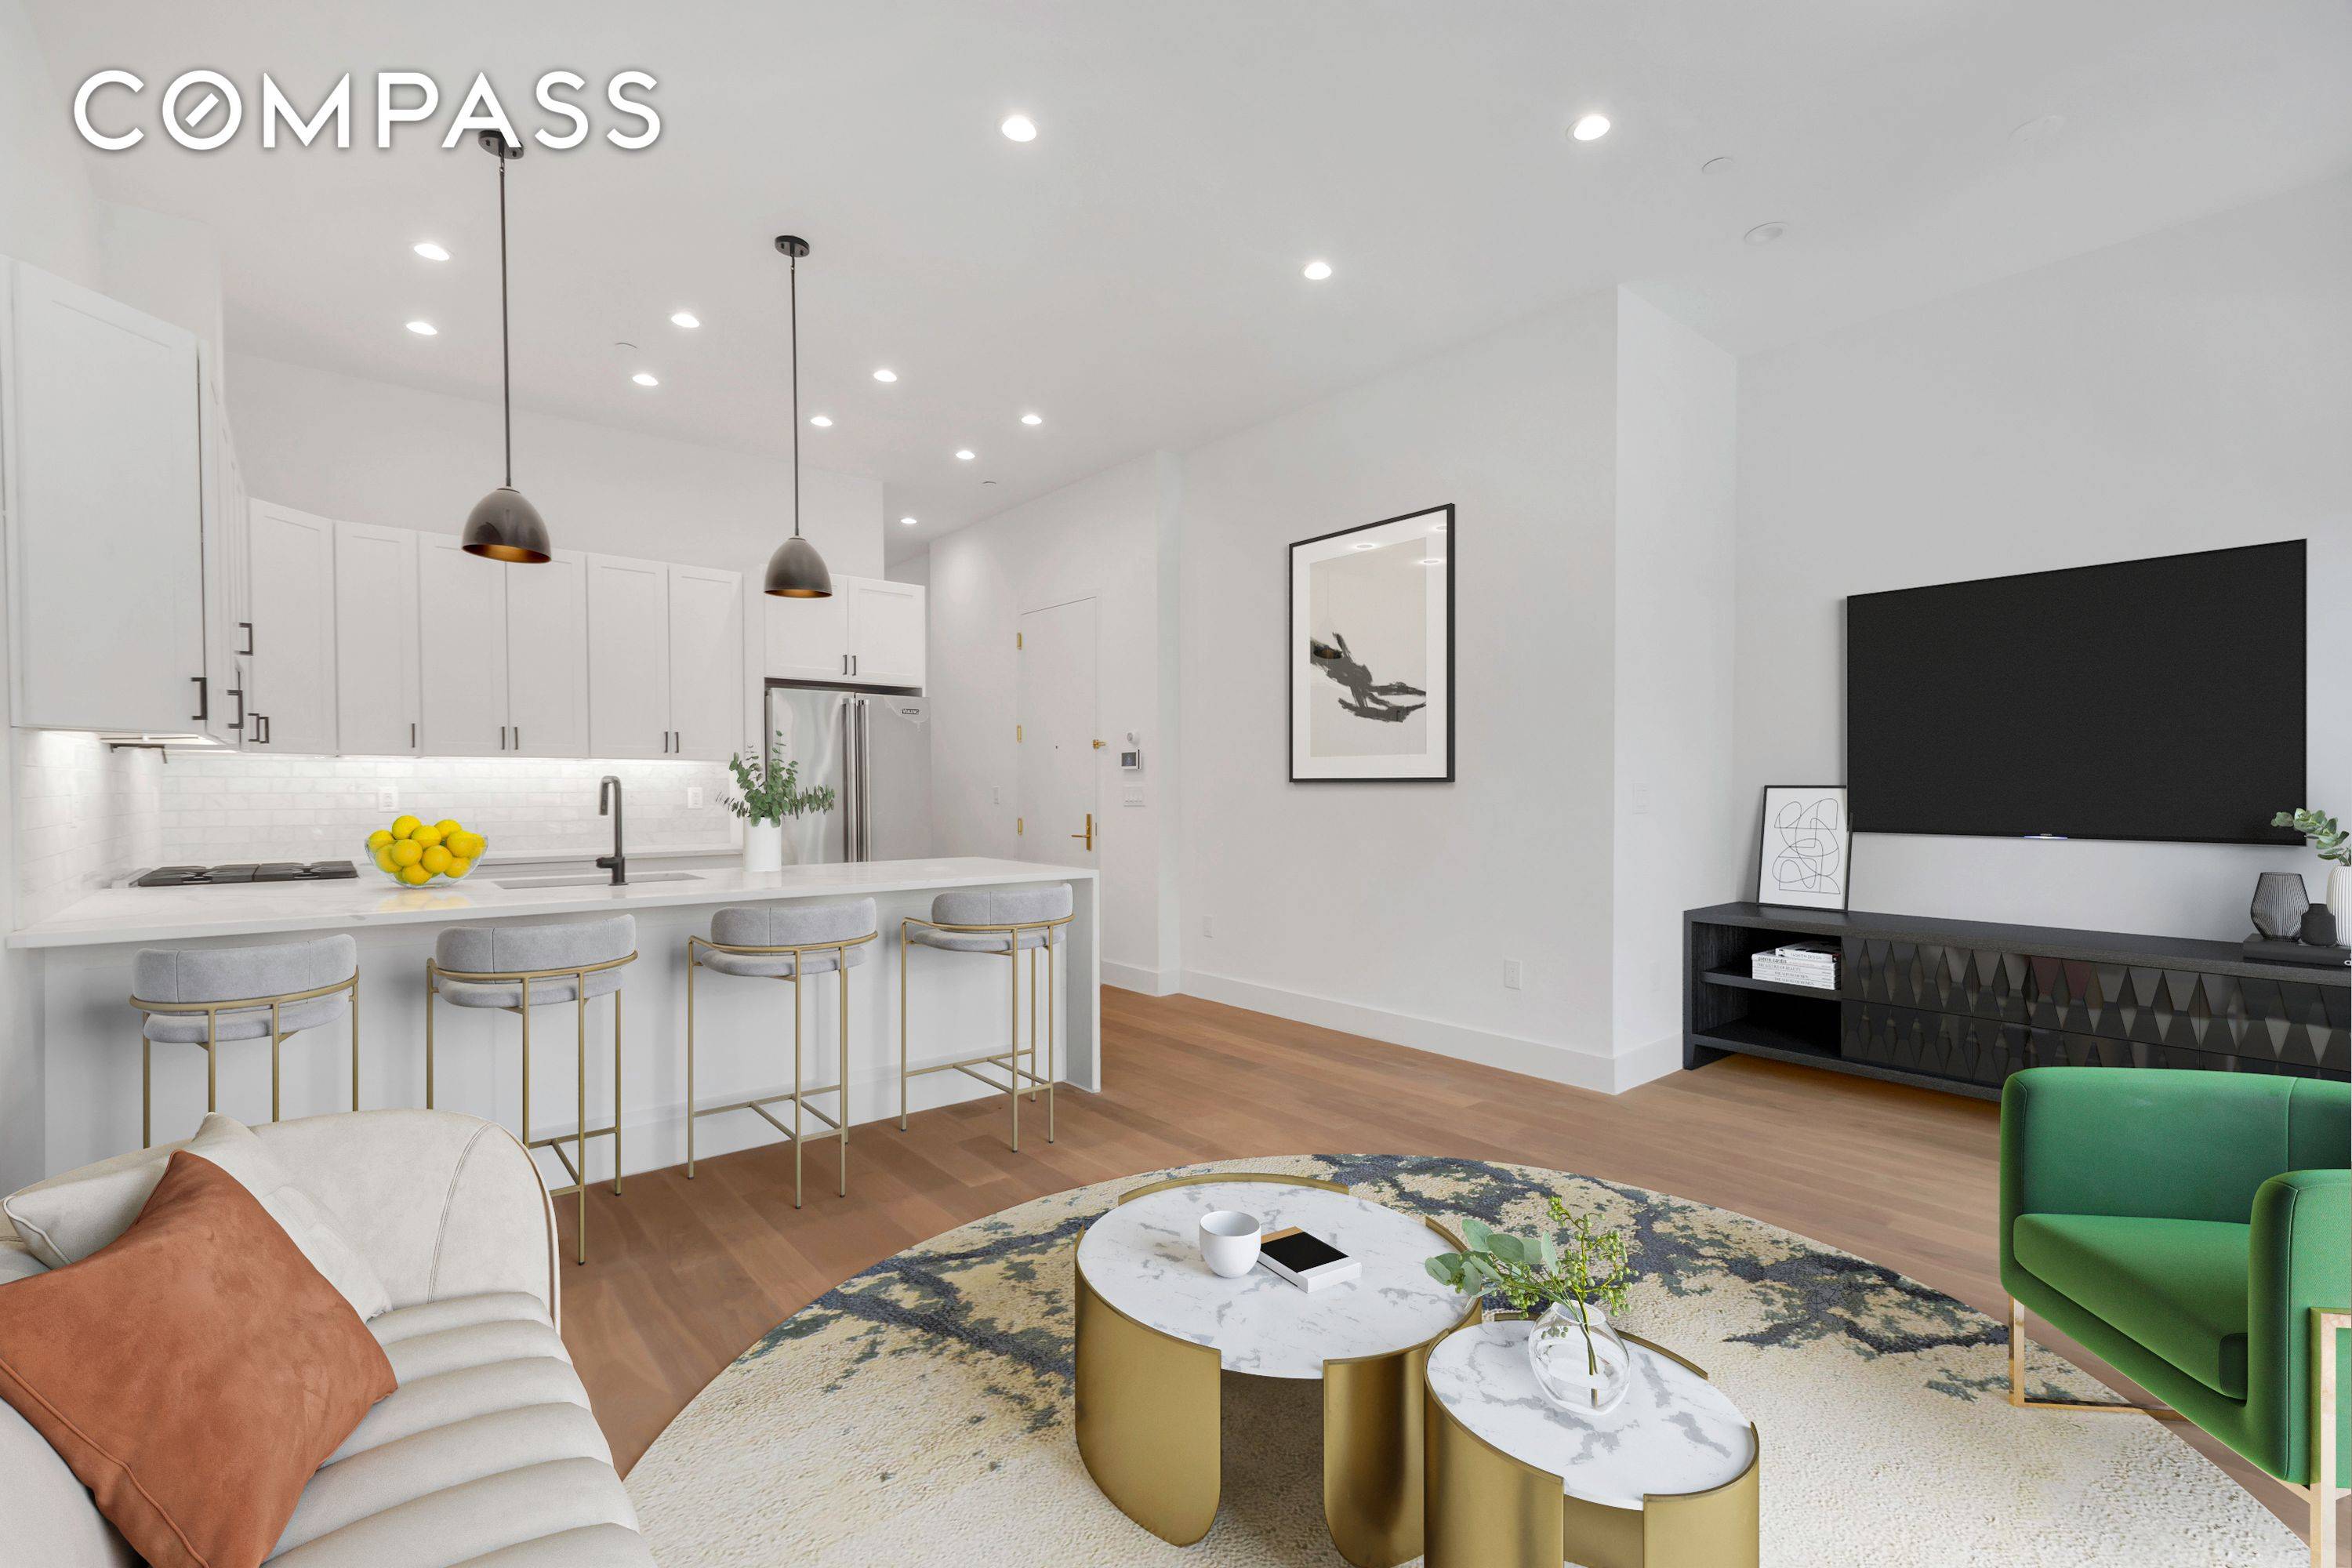 Introducing 102 Summit Street This Two Bedroom, Two Full Bathrooms offers the Ultimate Best of Classic Modern Brooklyn Condo Living.